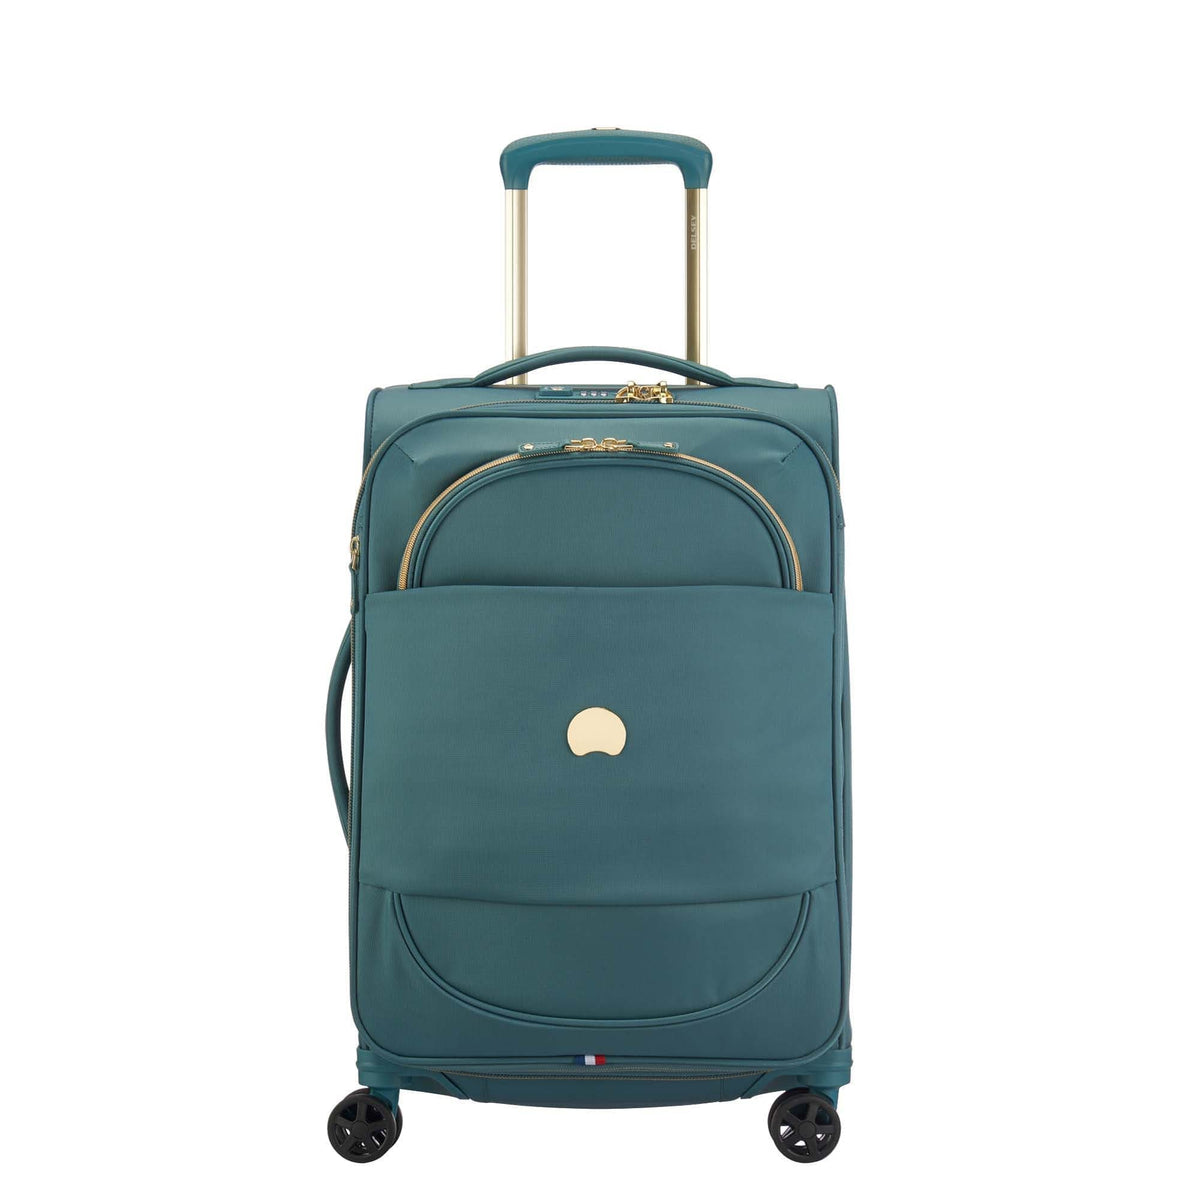 Delsey Montrouge Expandable Carry-On Spinner